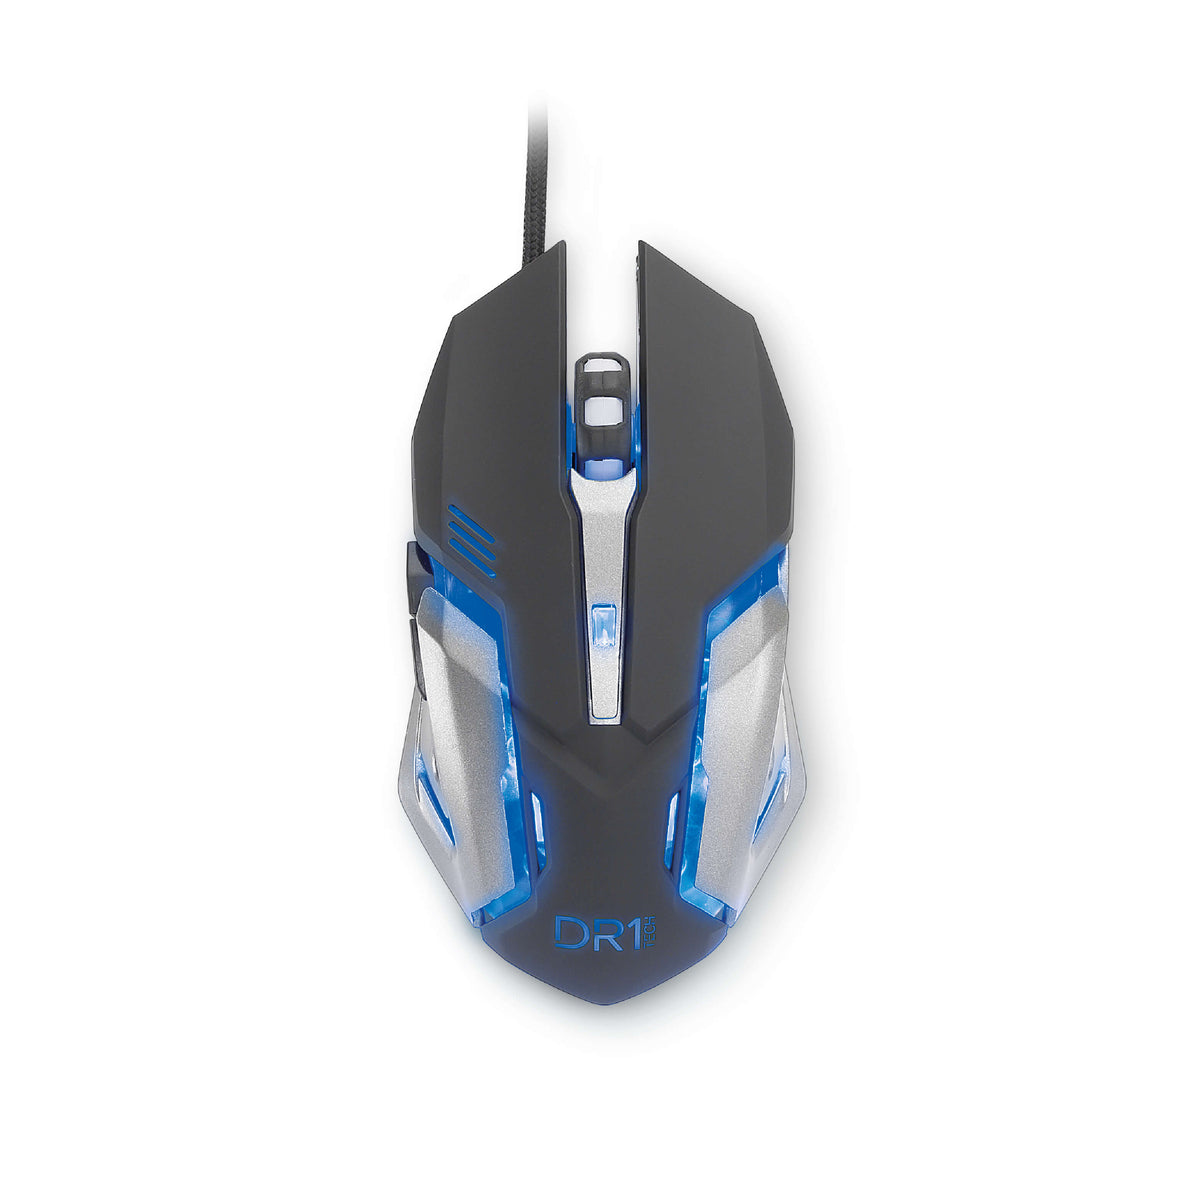 Avenger+ Gaming Mouse Pro for PC/PS4/XBOX